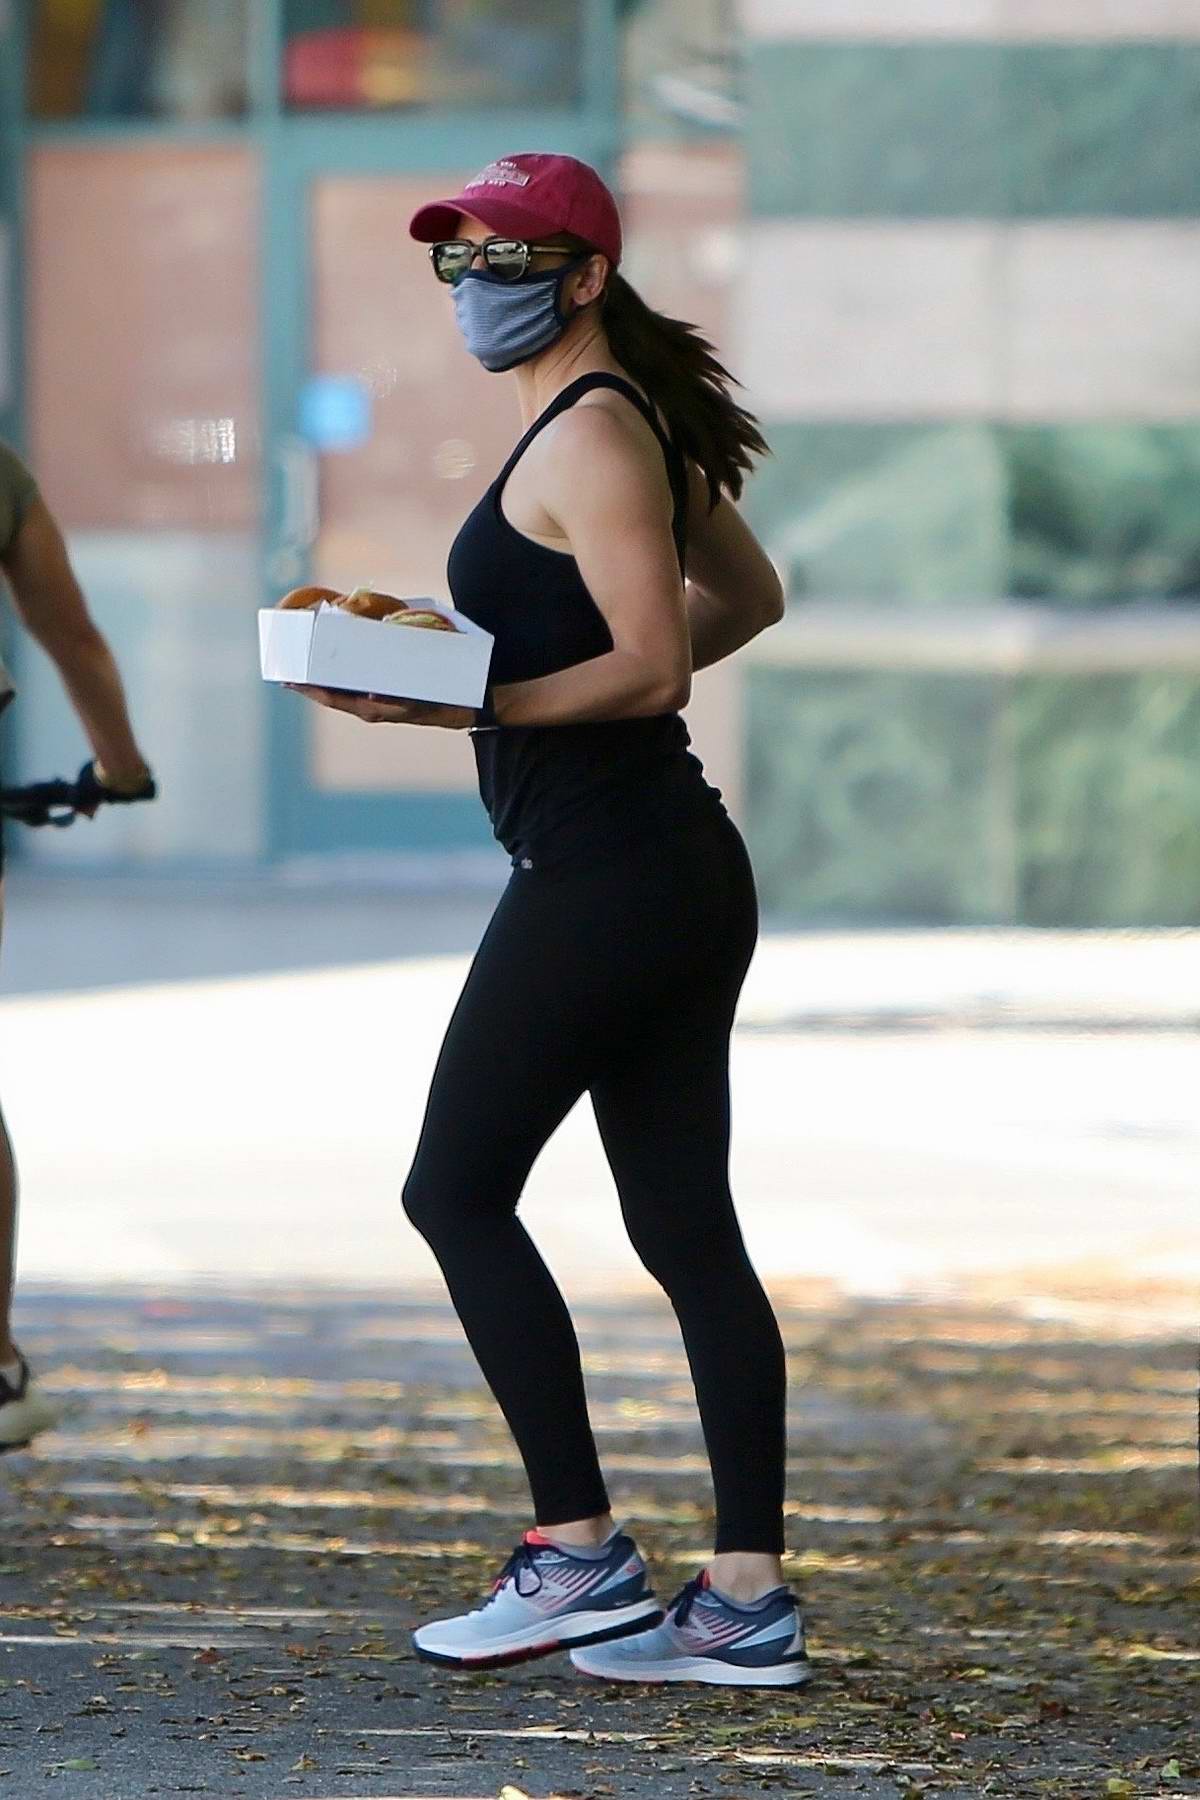 https://www.celebsfirst.com/wp-content/uploads/2020/05/jennifer-garner-sports-tank-top-and-leggings-while-grabbing-take-out-from-in-n-out-burger-in-brentwood-california-170520_7.jpg